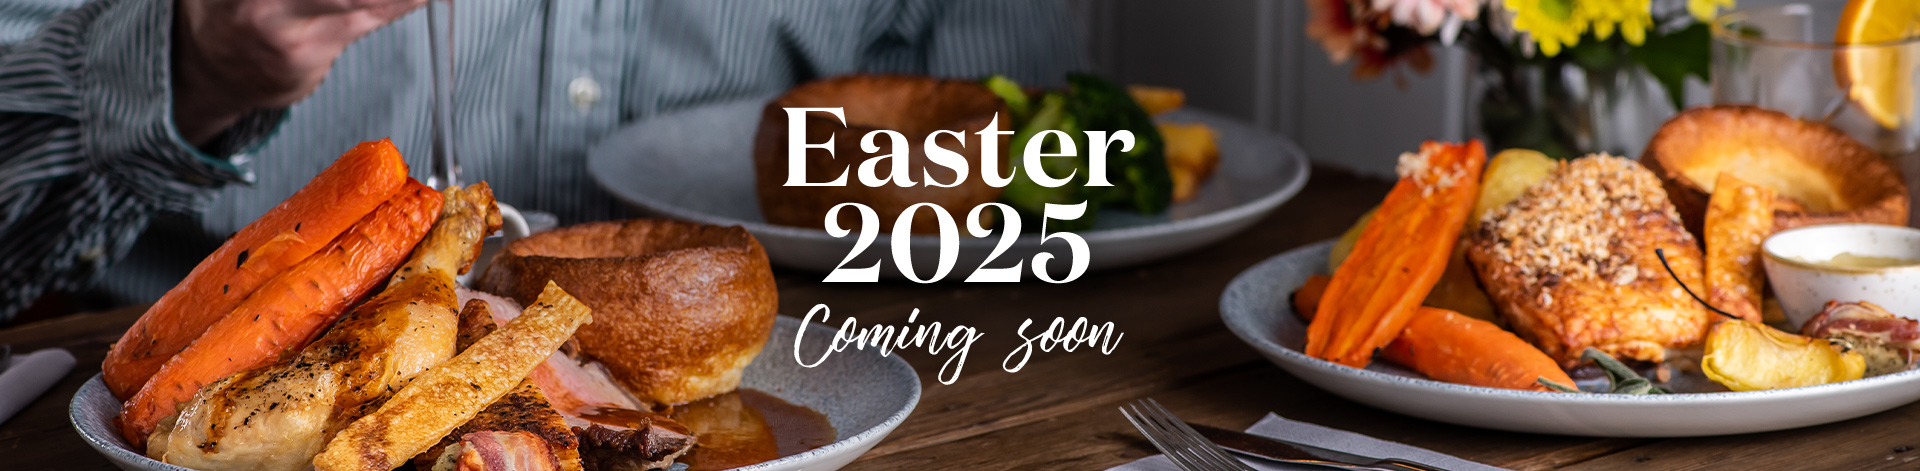 Easter at The Lion in Farningham